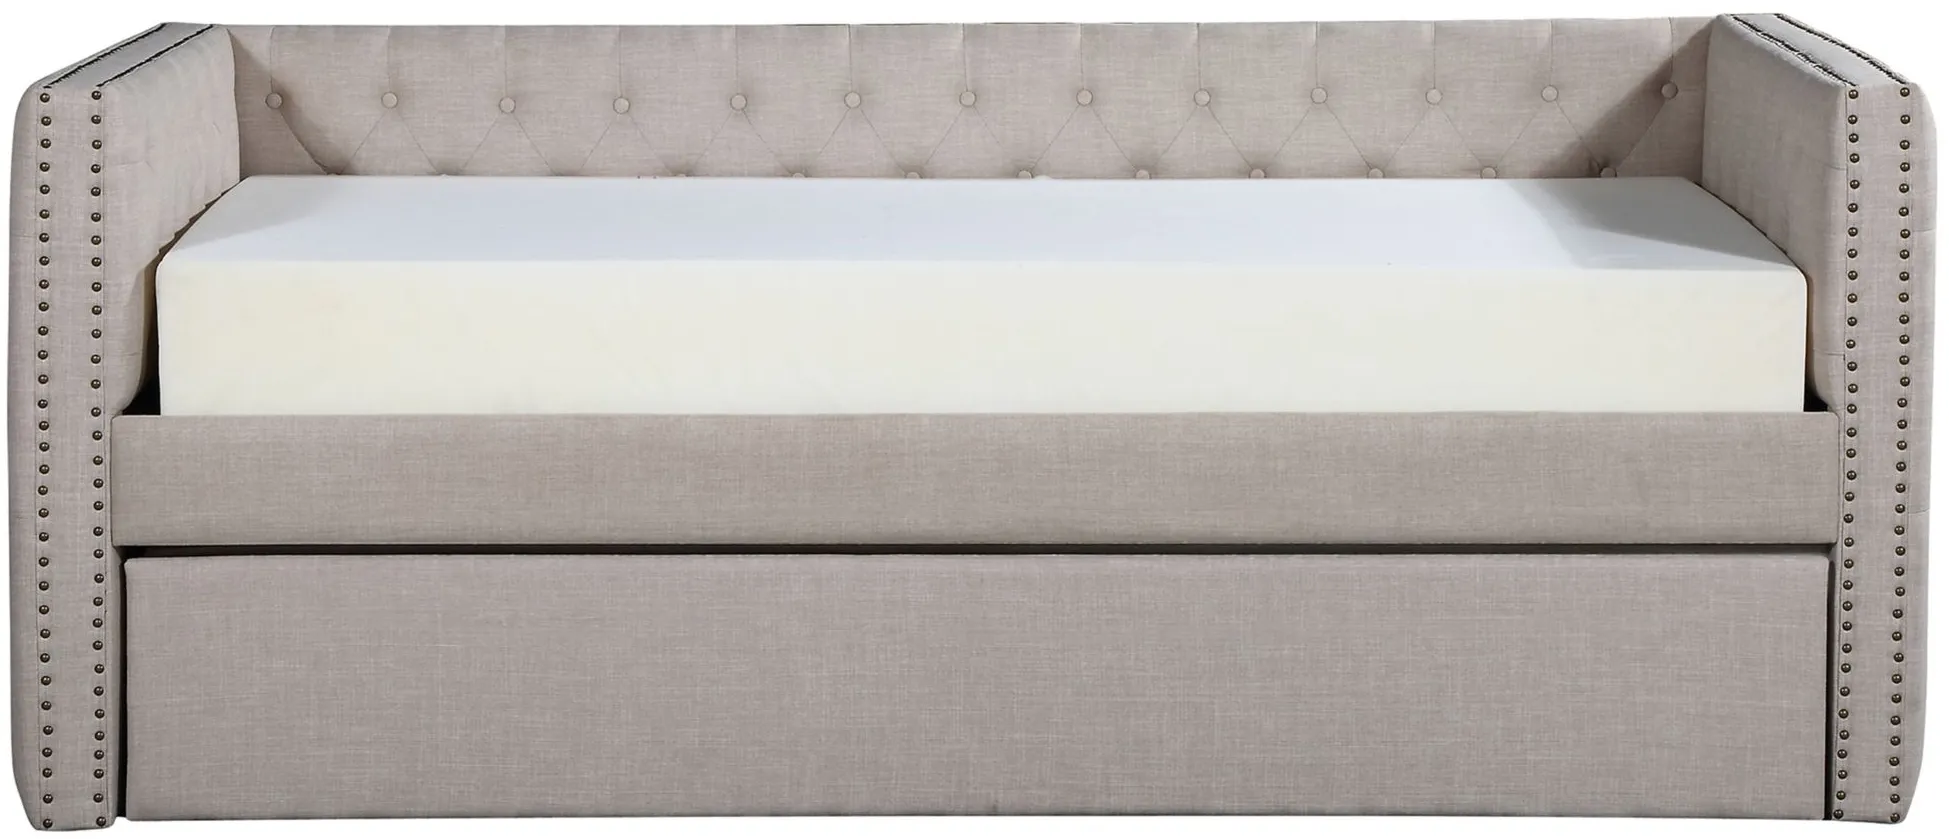 Trina Daybed with Trundle in Ivory by Crown Mark